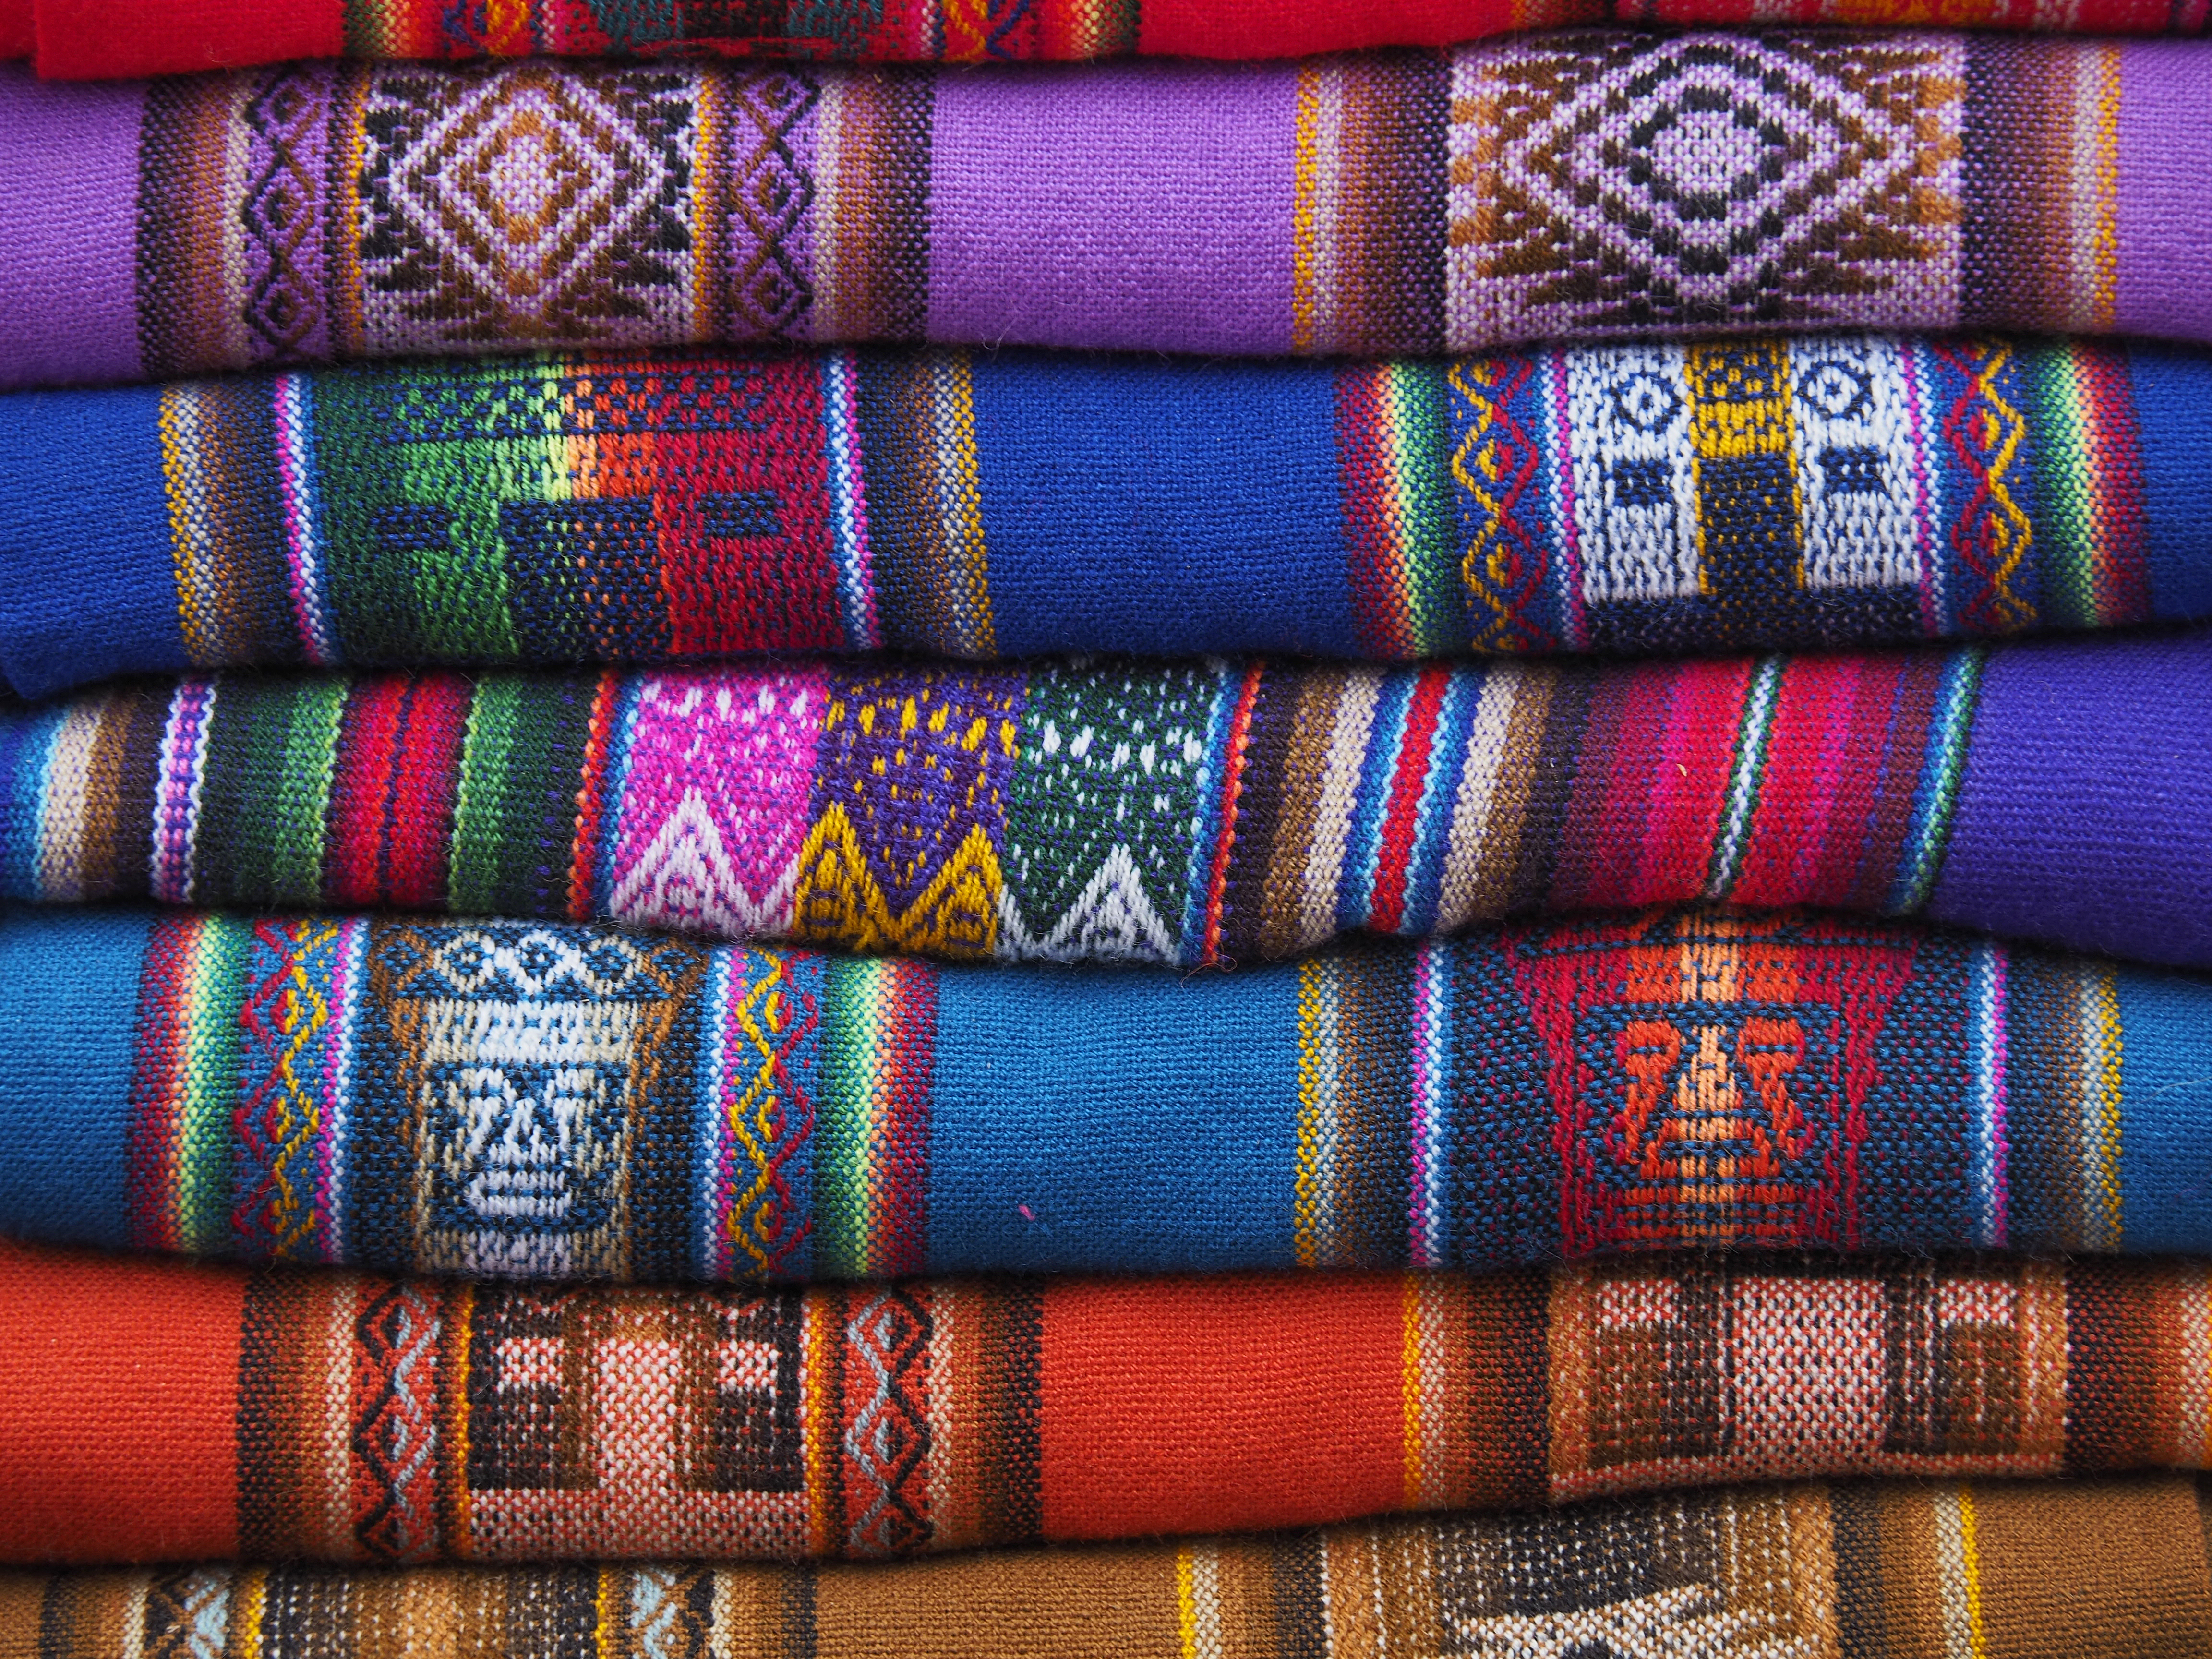 Colorful South American Textiles on a Market Stall